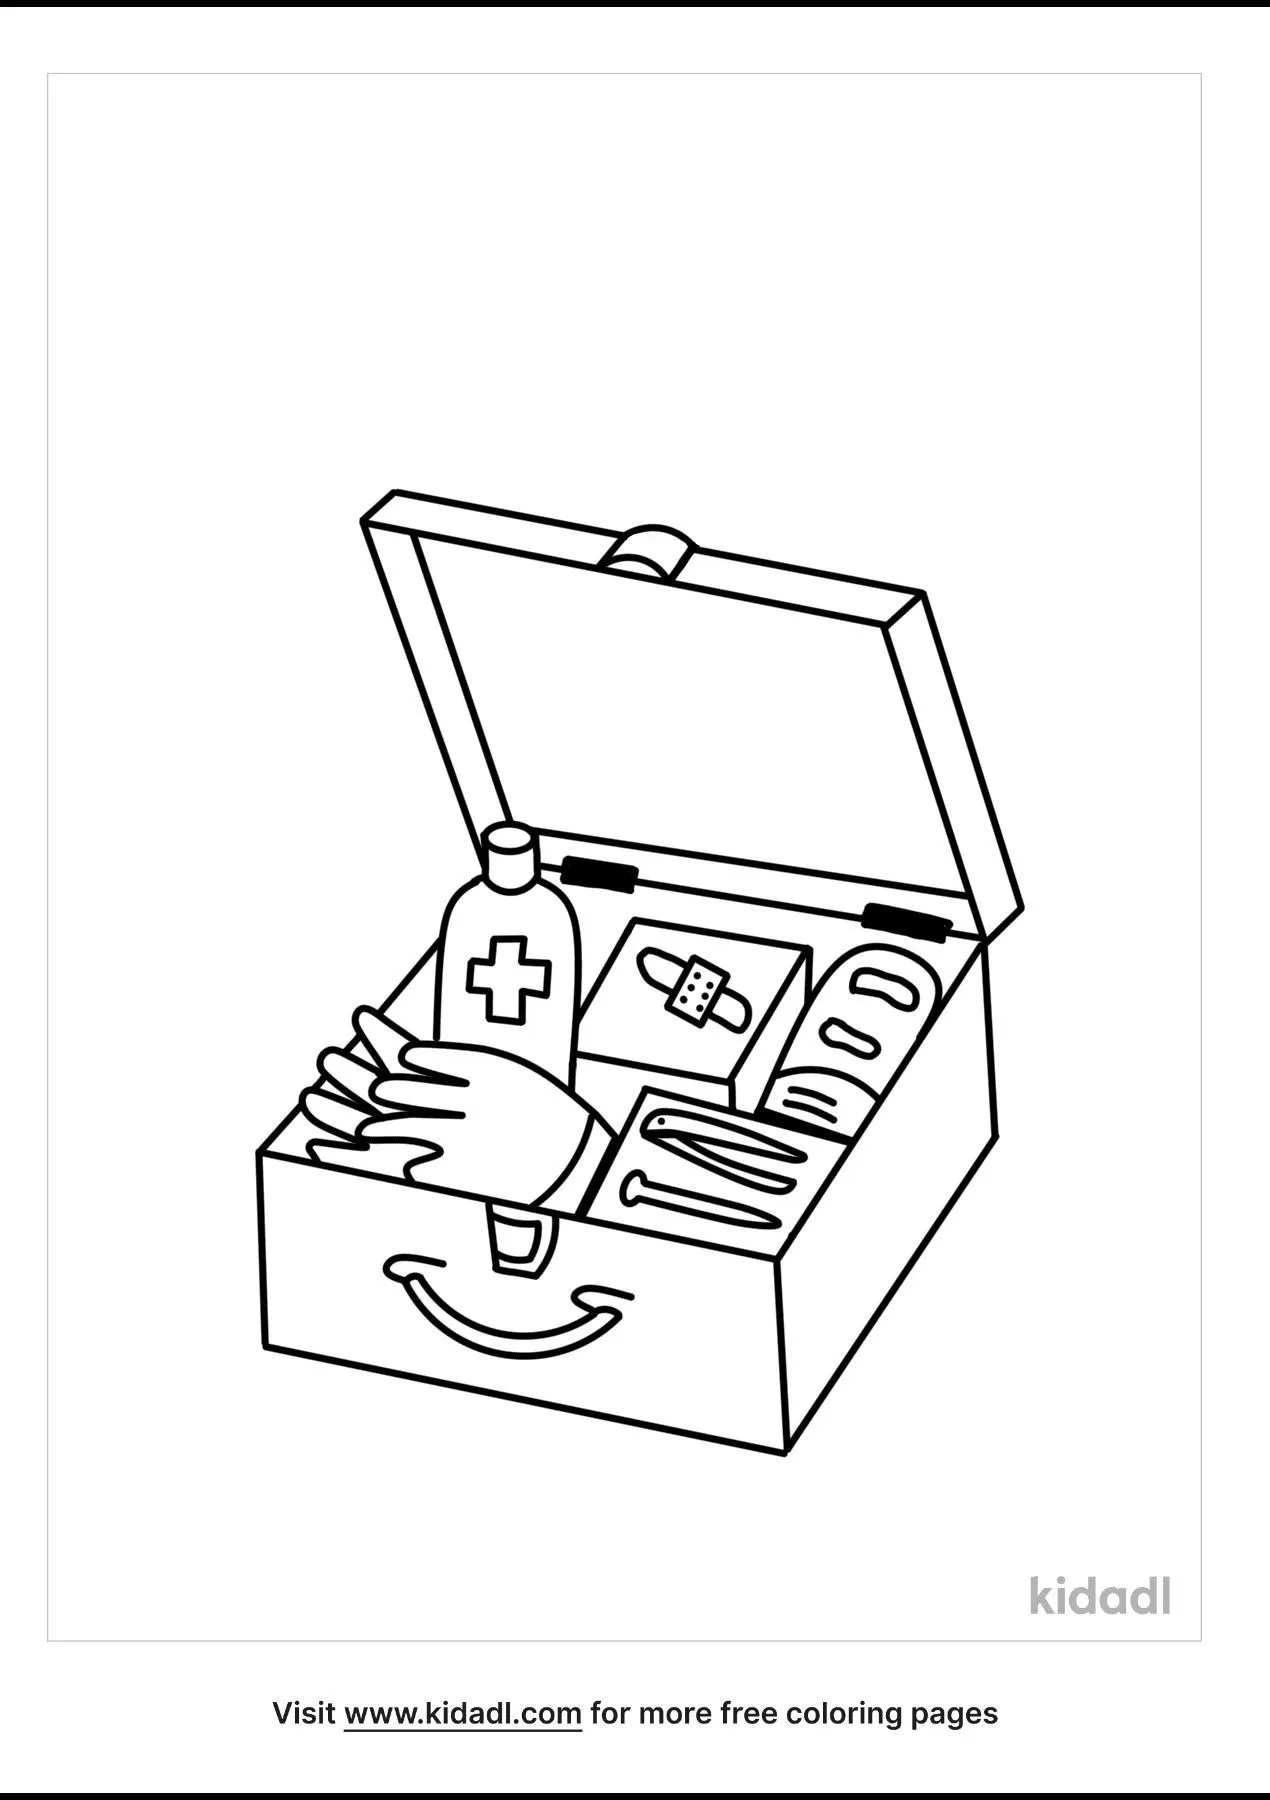 First Aid Kit Coloring Pages Free At Home Coloring Pages Kidadl